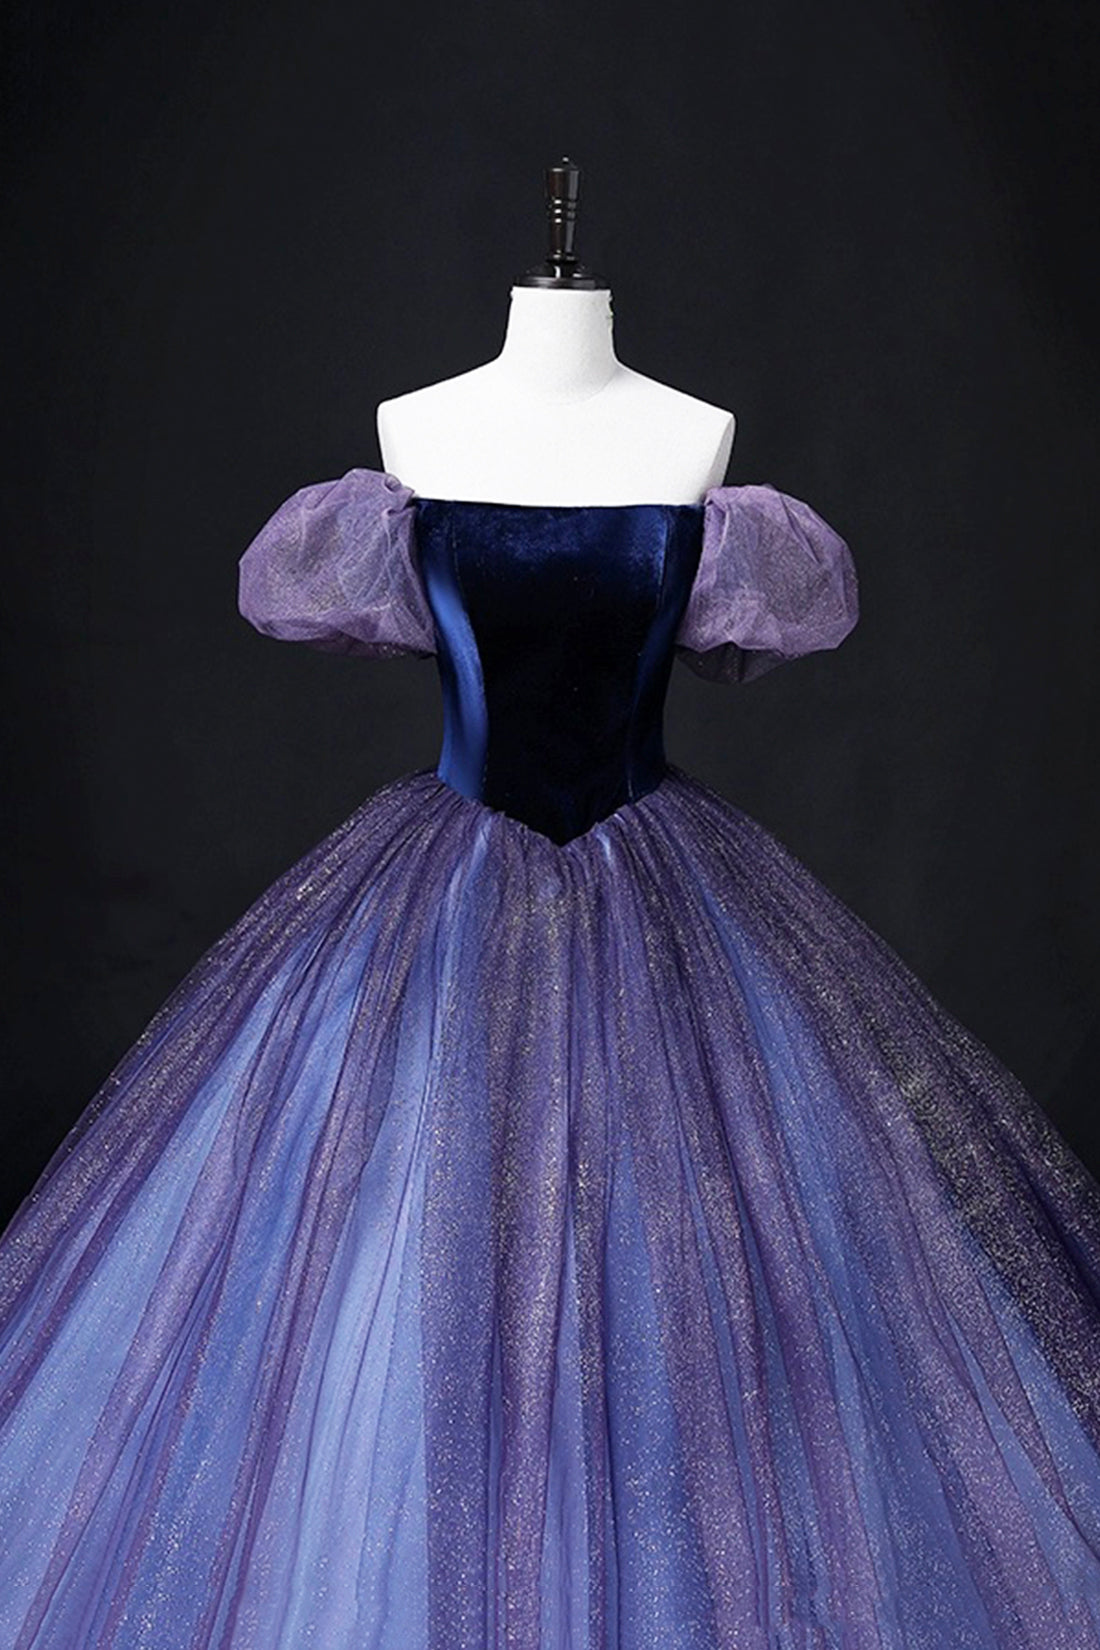 Off the Shoulder Velvet and Tulle Long Ball Gown, Purple A-Line Formal Evening Dress